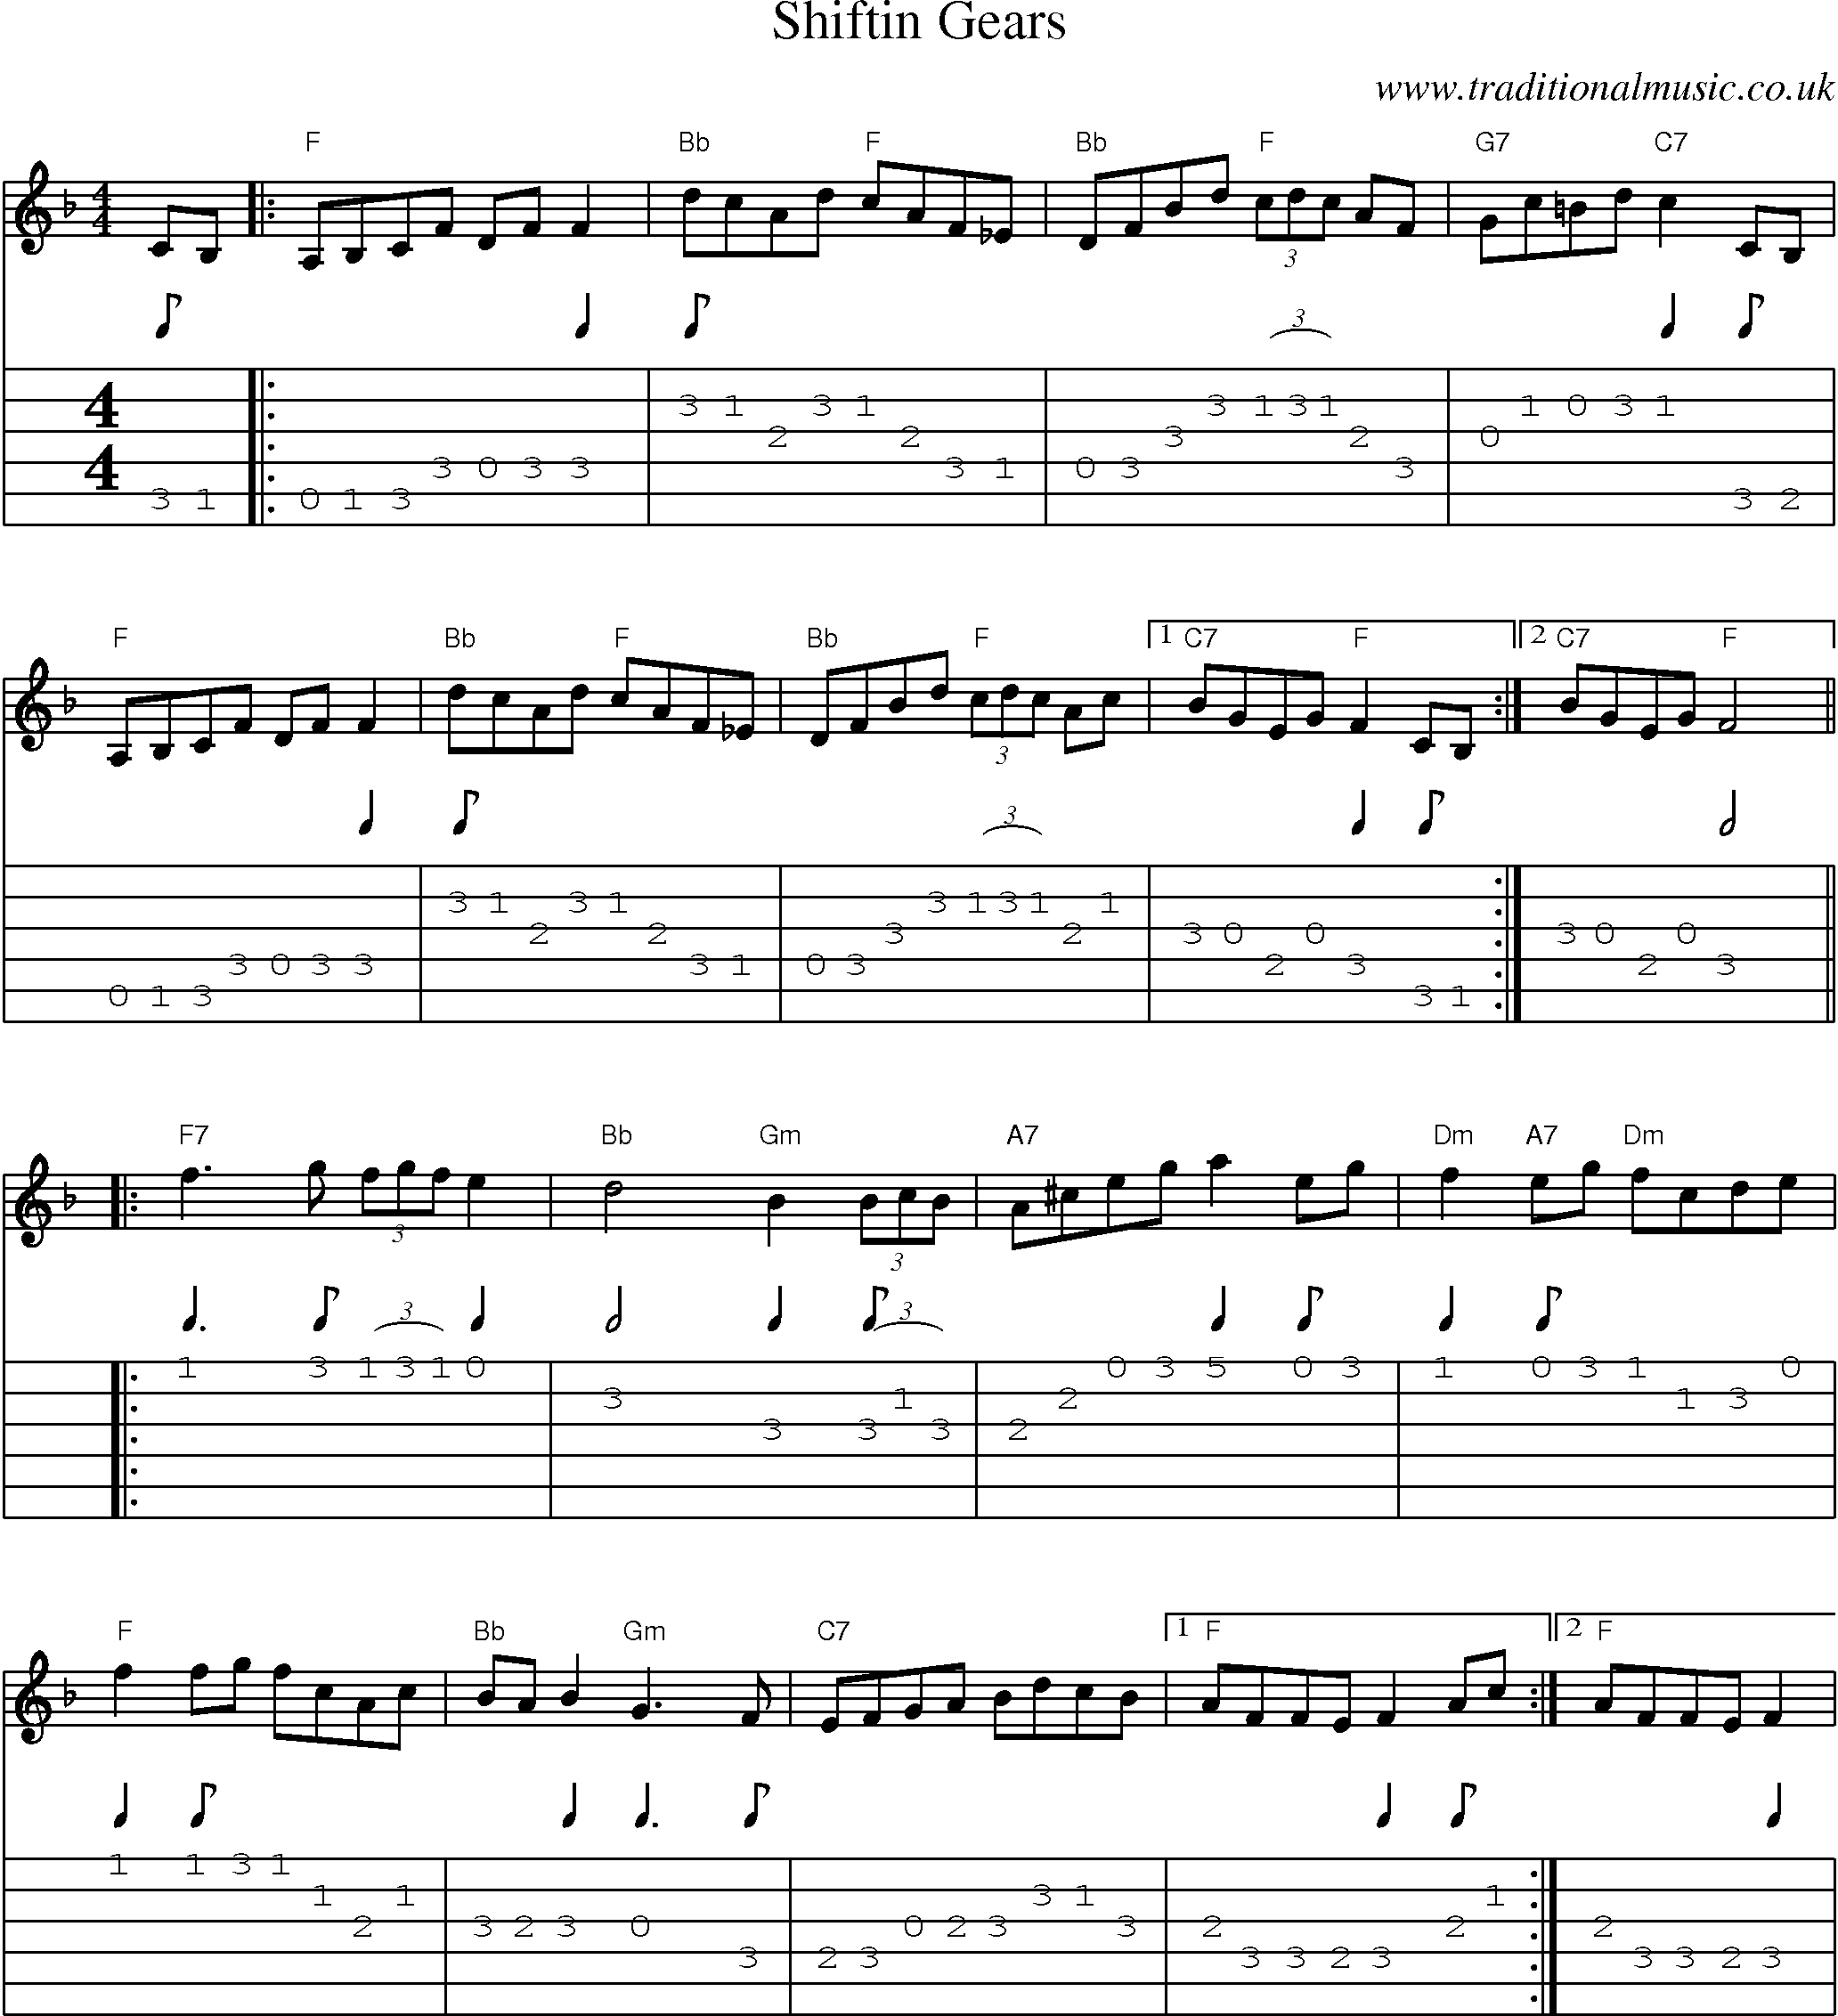 Music Score and Guitar Tabs for Shiftin Gears